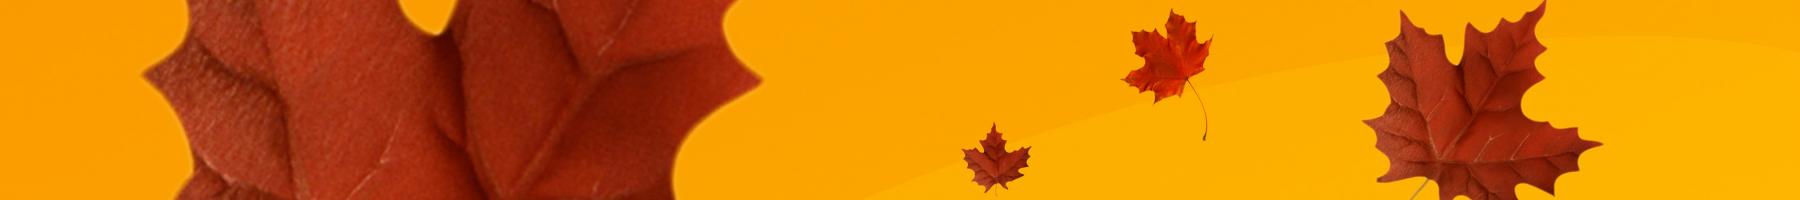 Maple leaves on yellow background